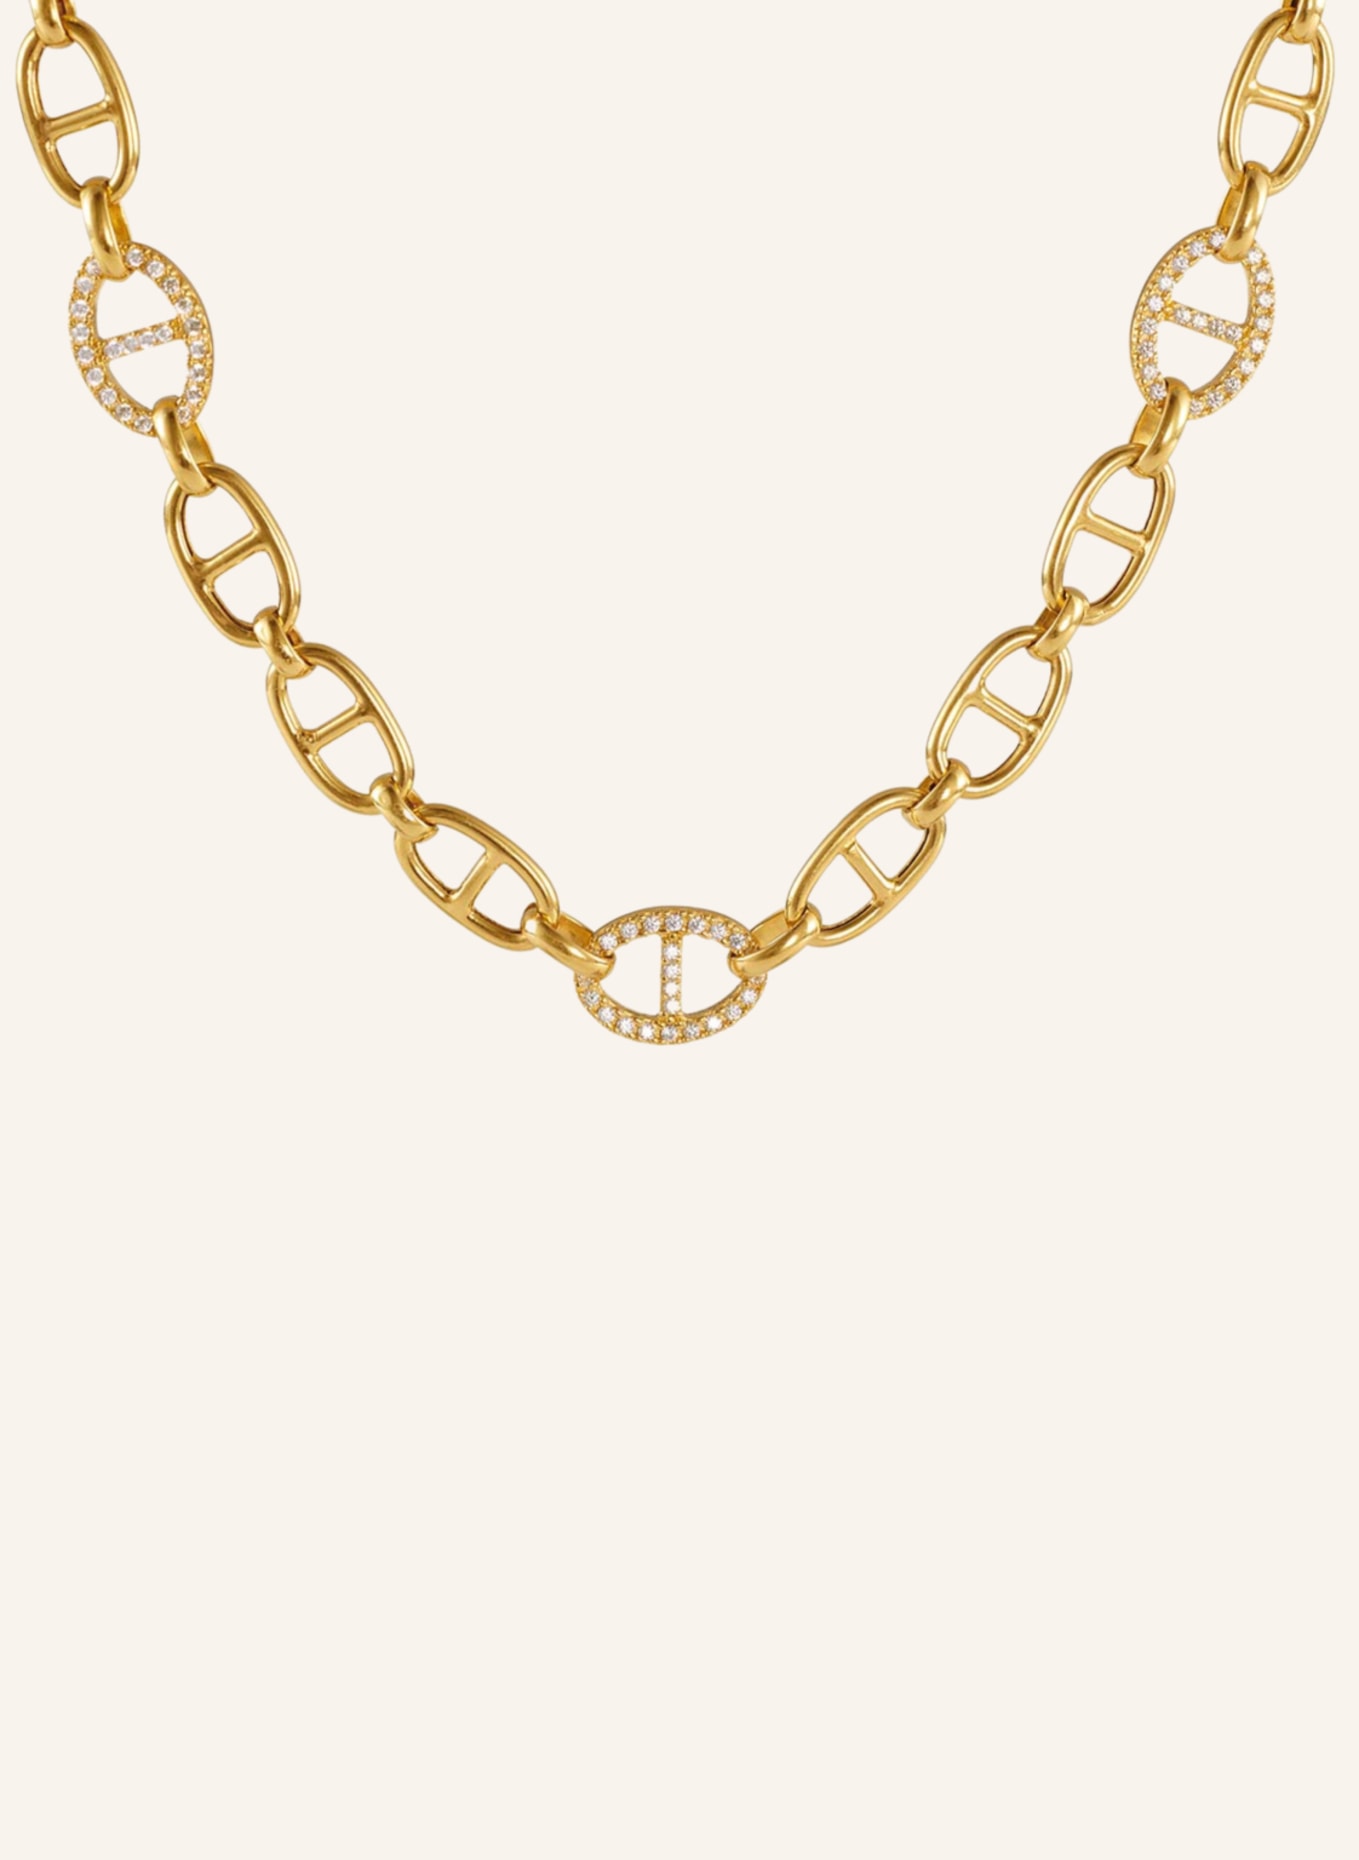 GLAMBOU X GLAMPARTY Kette DRESS UP NECKLACE by GLAMBOU, Farbe: GOLD (Bild 1)